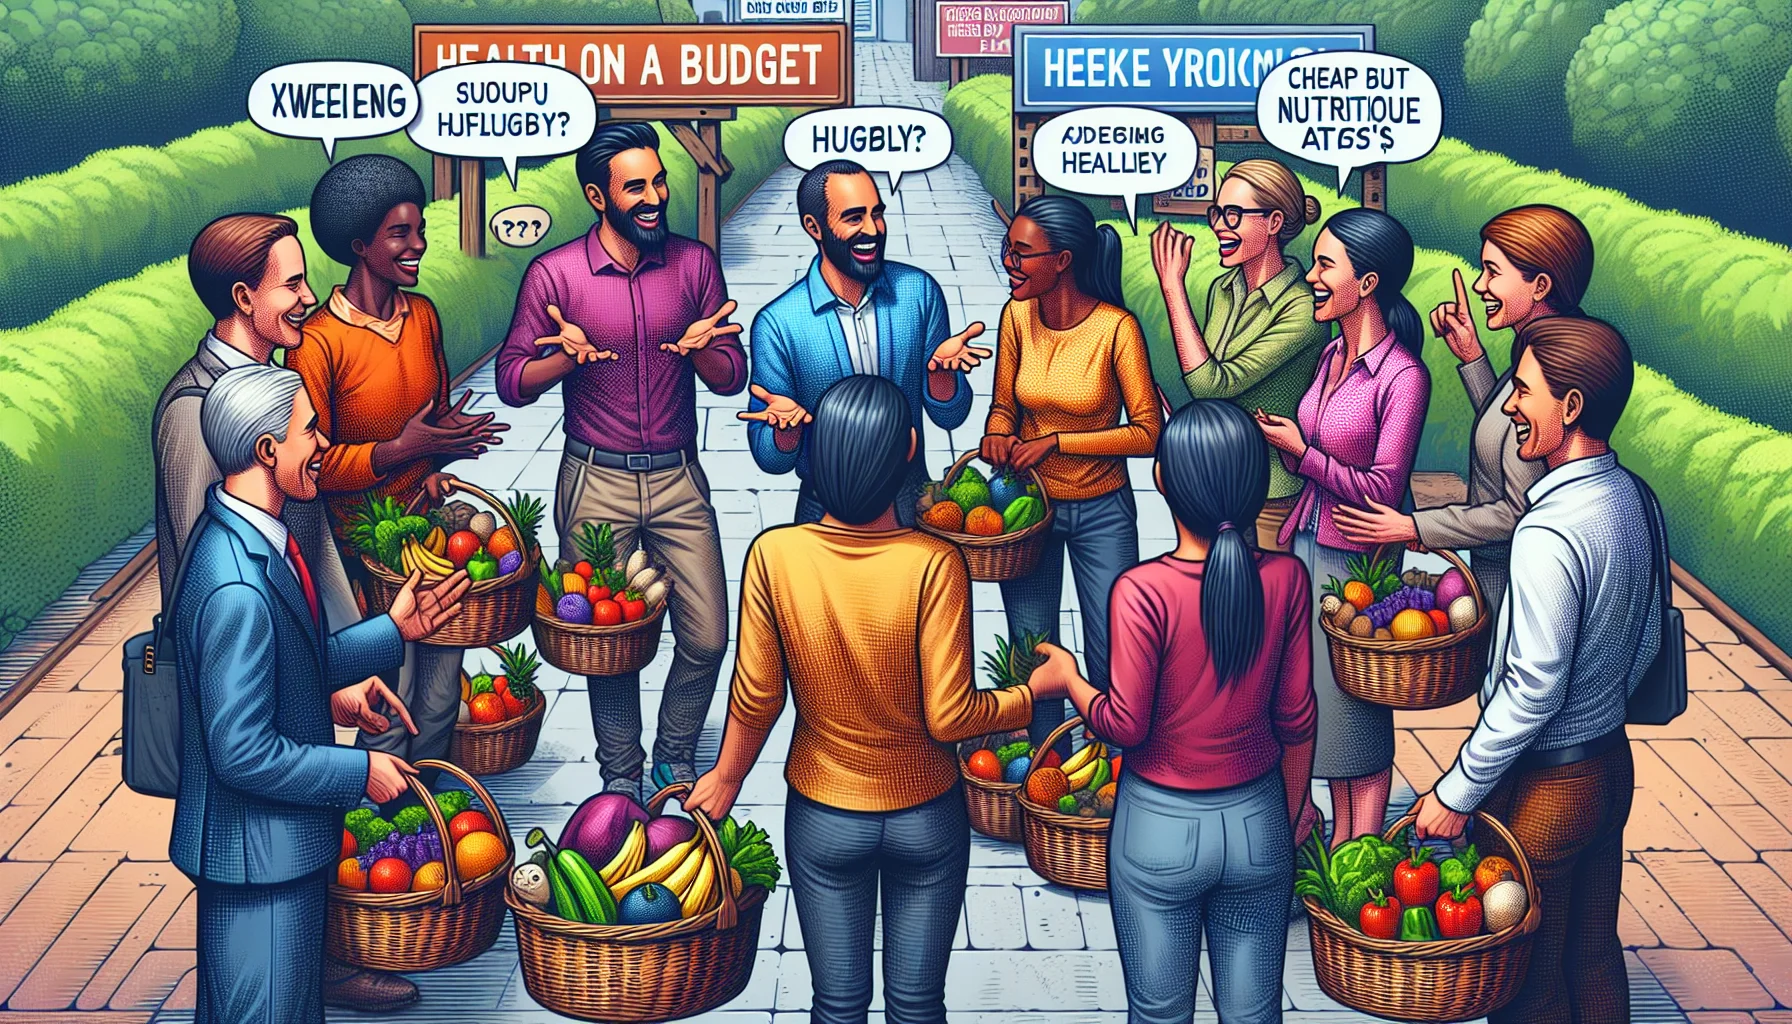 Create a detailed and realistic humorous scene of a Weekly Health Discussion. Show a vibrant group of people from different descents such as Caucasian, Hispanic, Black, Middle-Eastern, and South Asian engaging in a lively talk. Make sure each individual is carrying a basket full of fresh fruits and vegetables, laughing and discussing. Emphasize the different colors and textures of the affordable healthy food to make it more appealing. Have signage in the background articulating 'Health on a Budget' and 'Cheap but Nutritious Eats'. Highlight the camaraderie, jovial atmosphere, and enthusiasm around eating healthy for less money.